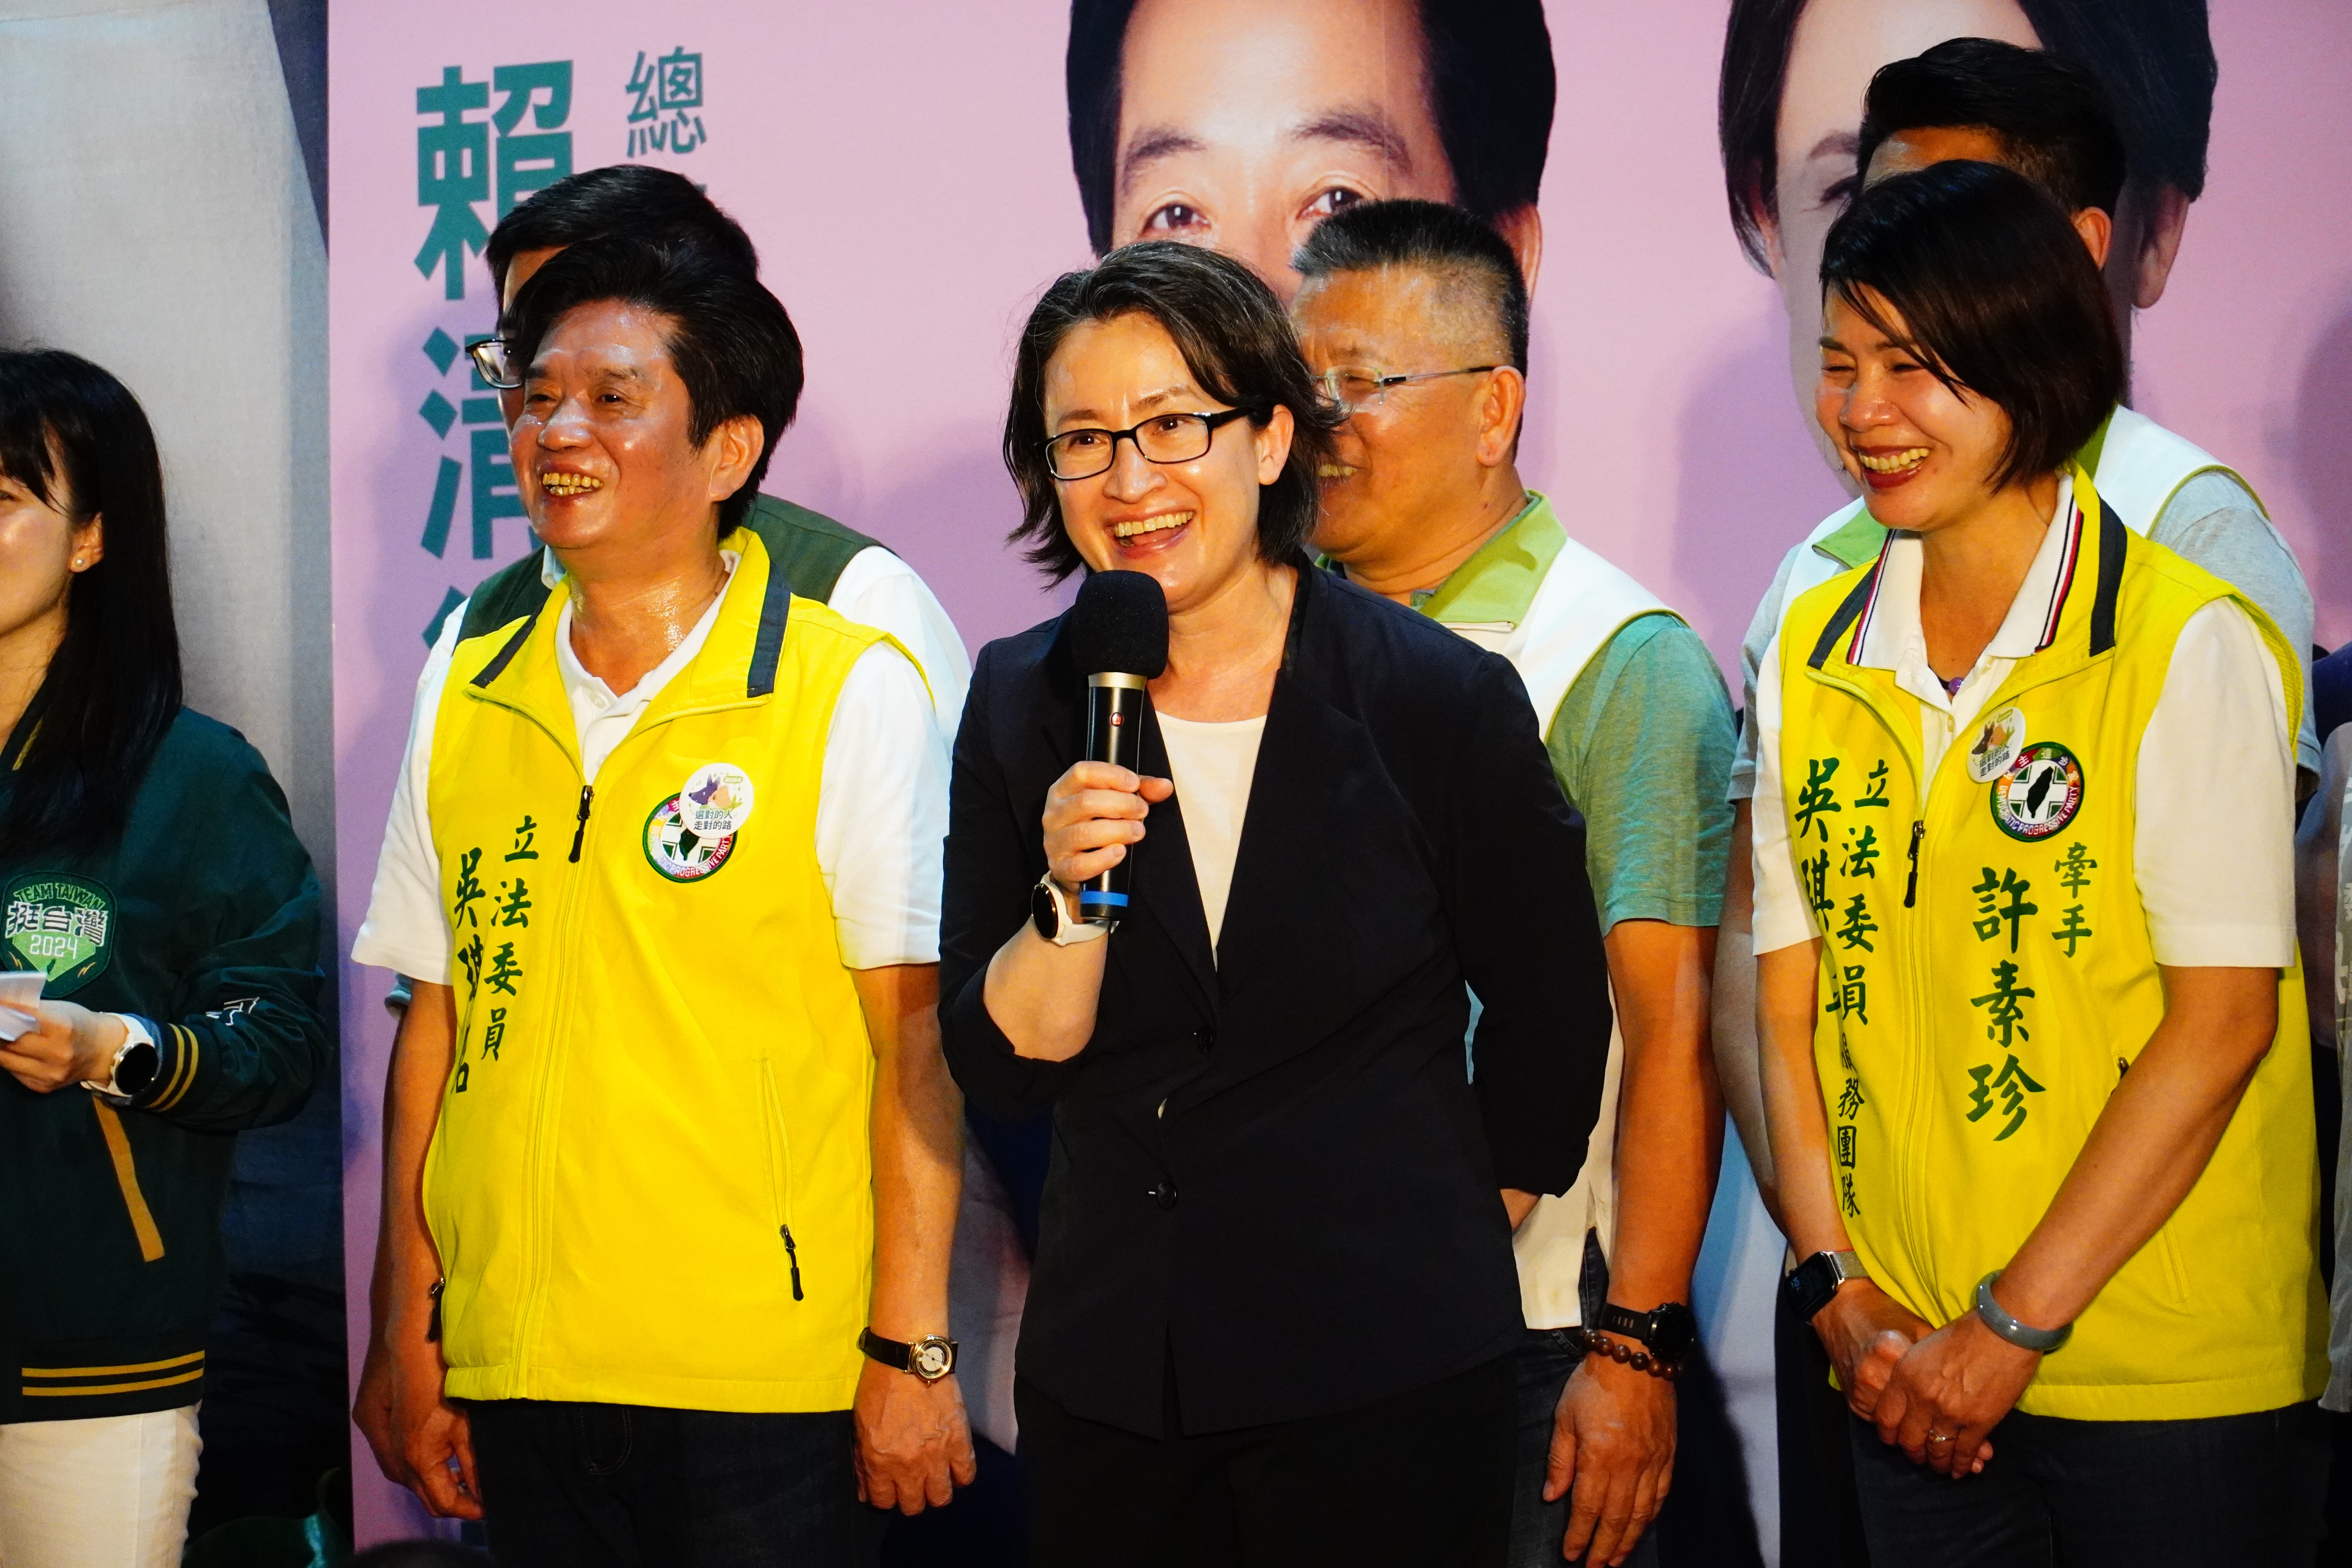 Hsiao Meiqin will not follow the path of Taiwan independence: President Tsai assures the United States that it will work hard to maintain the status quo | Lianhe News Network